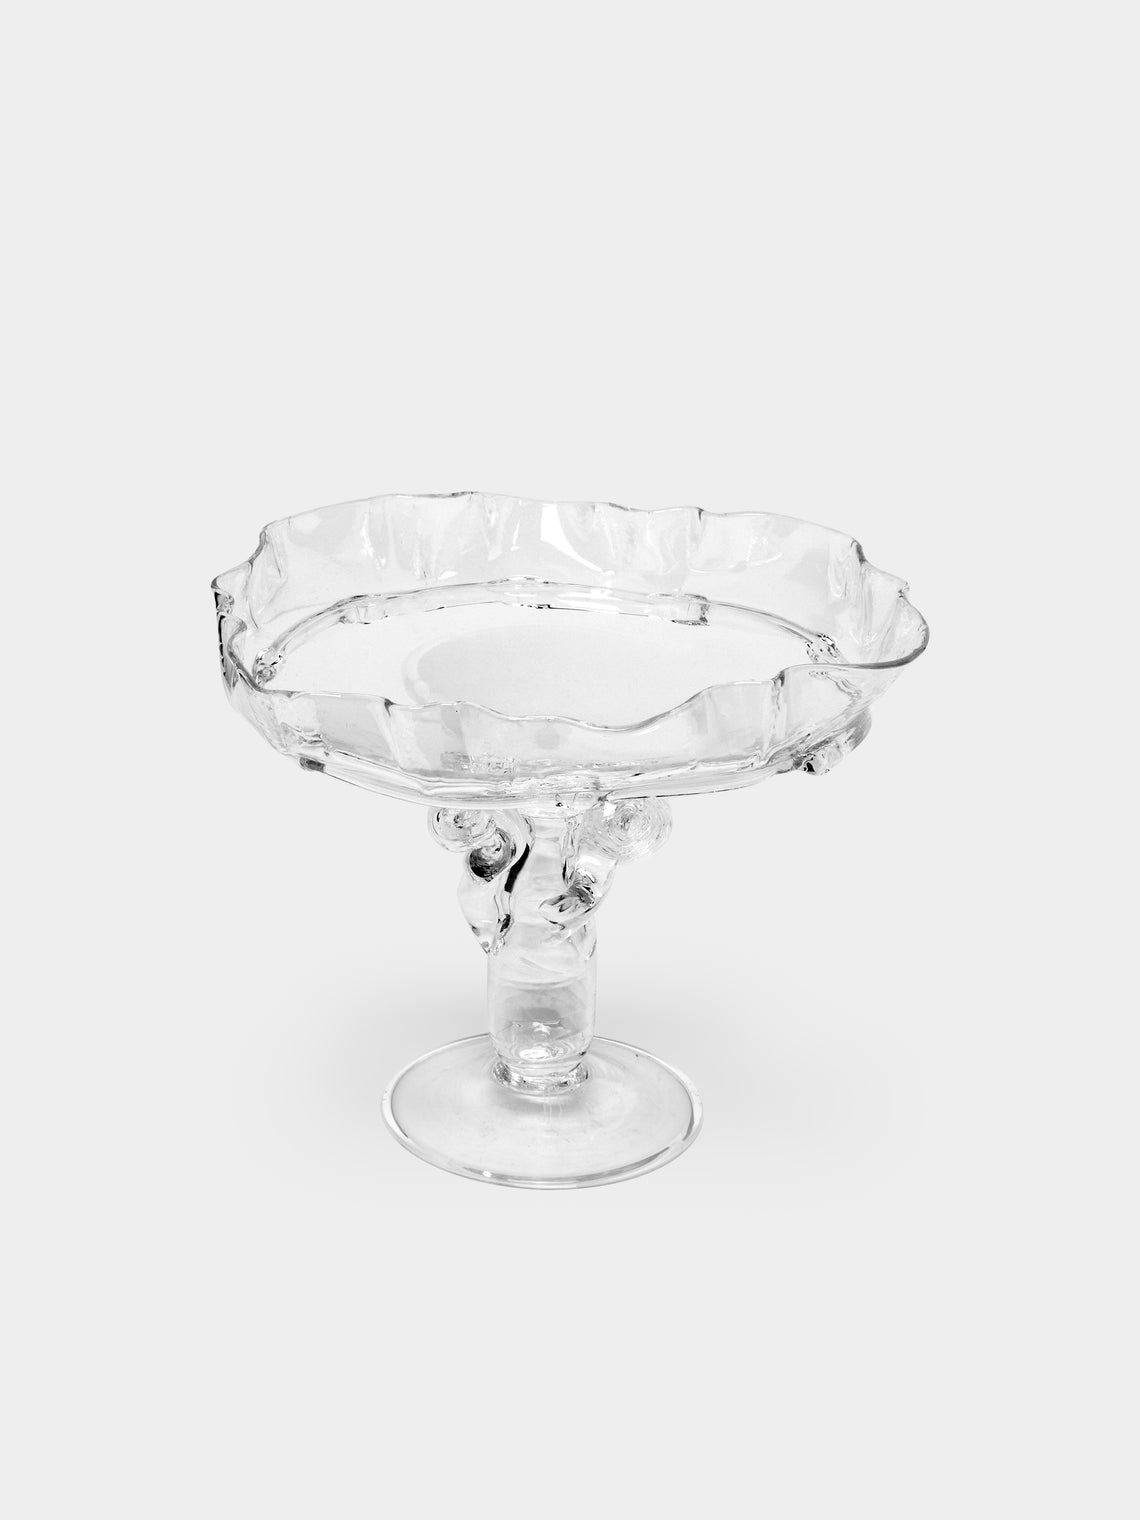 Alexander Kirkeby - Hand-Blown Crystal Footed Fruit Bowl - ABASK